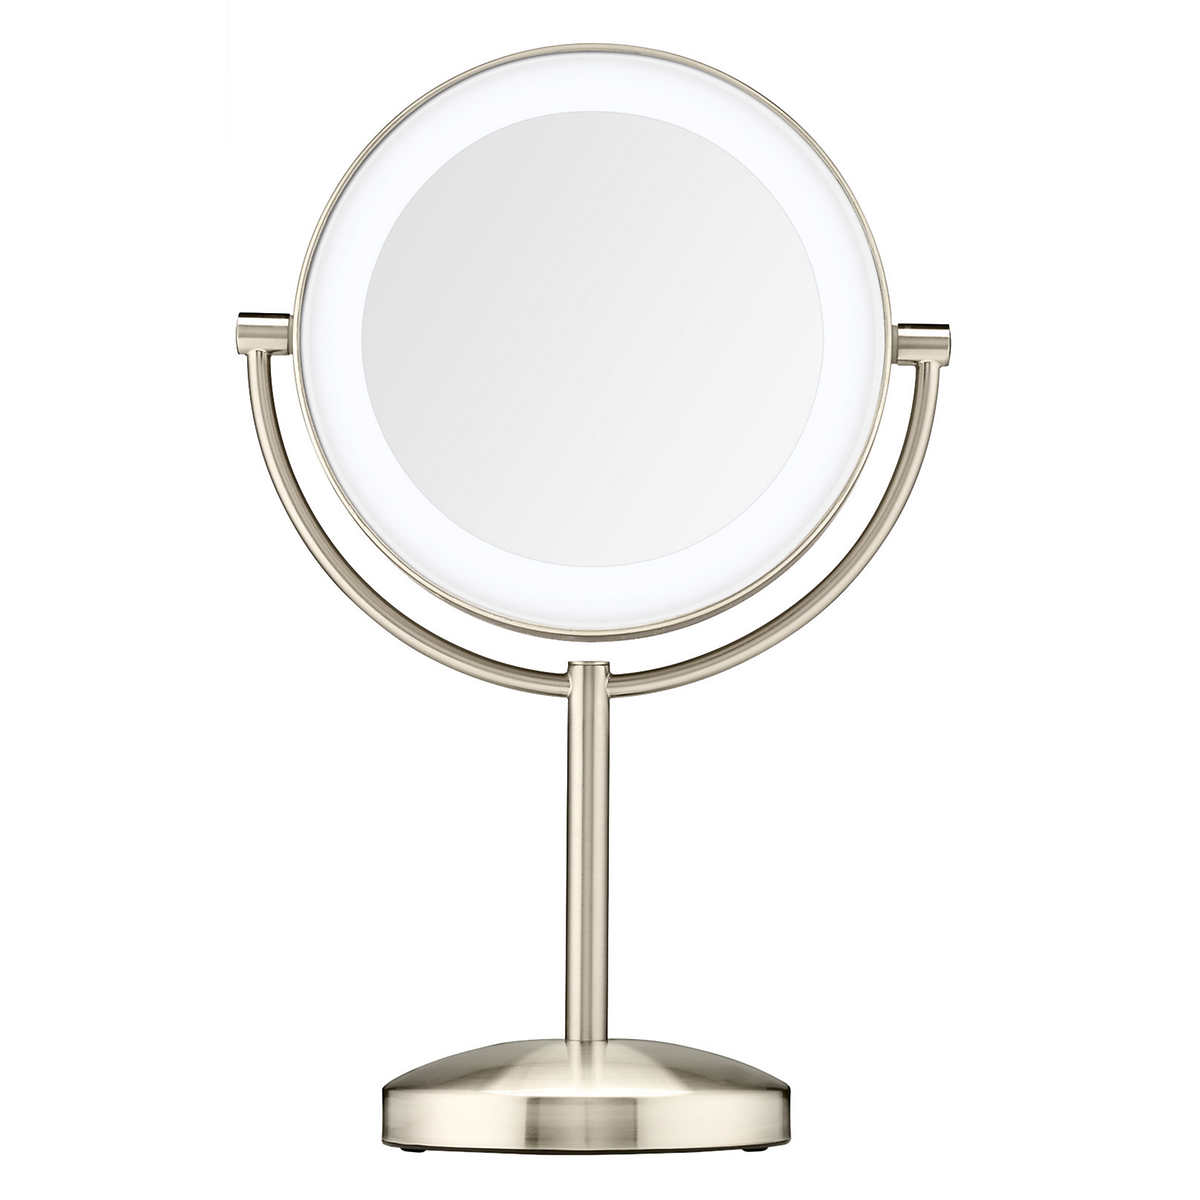 Reflections Led Lighted Mirror By, Conair Led Makeup Mirror 1x 10x Magnification